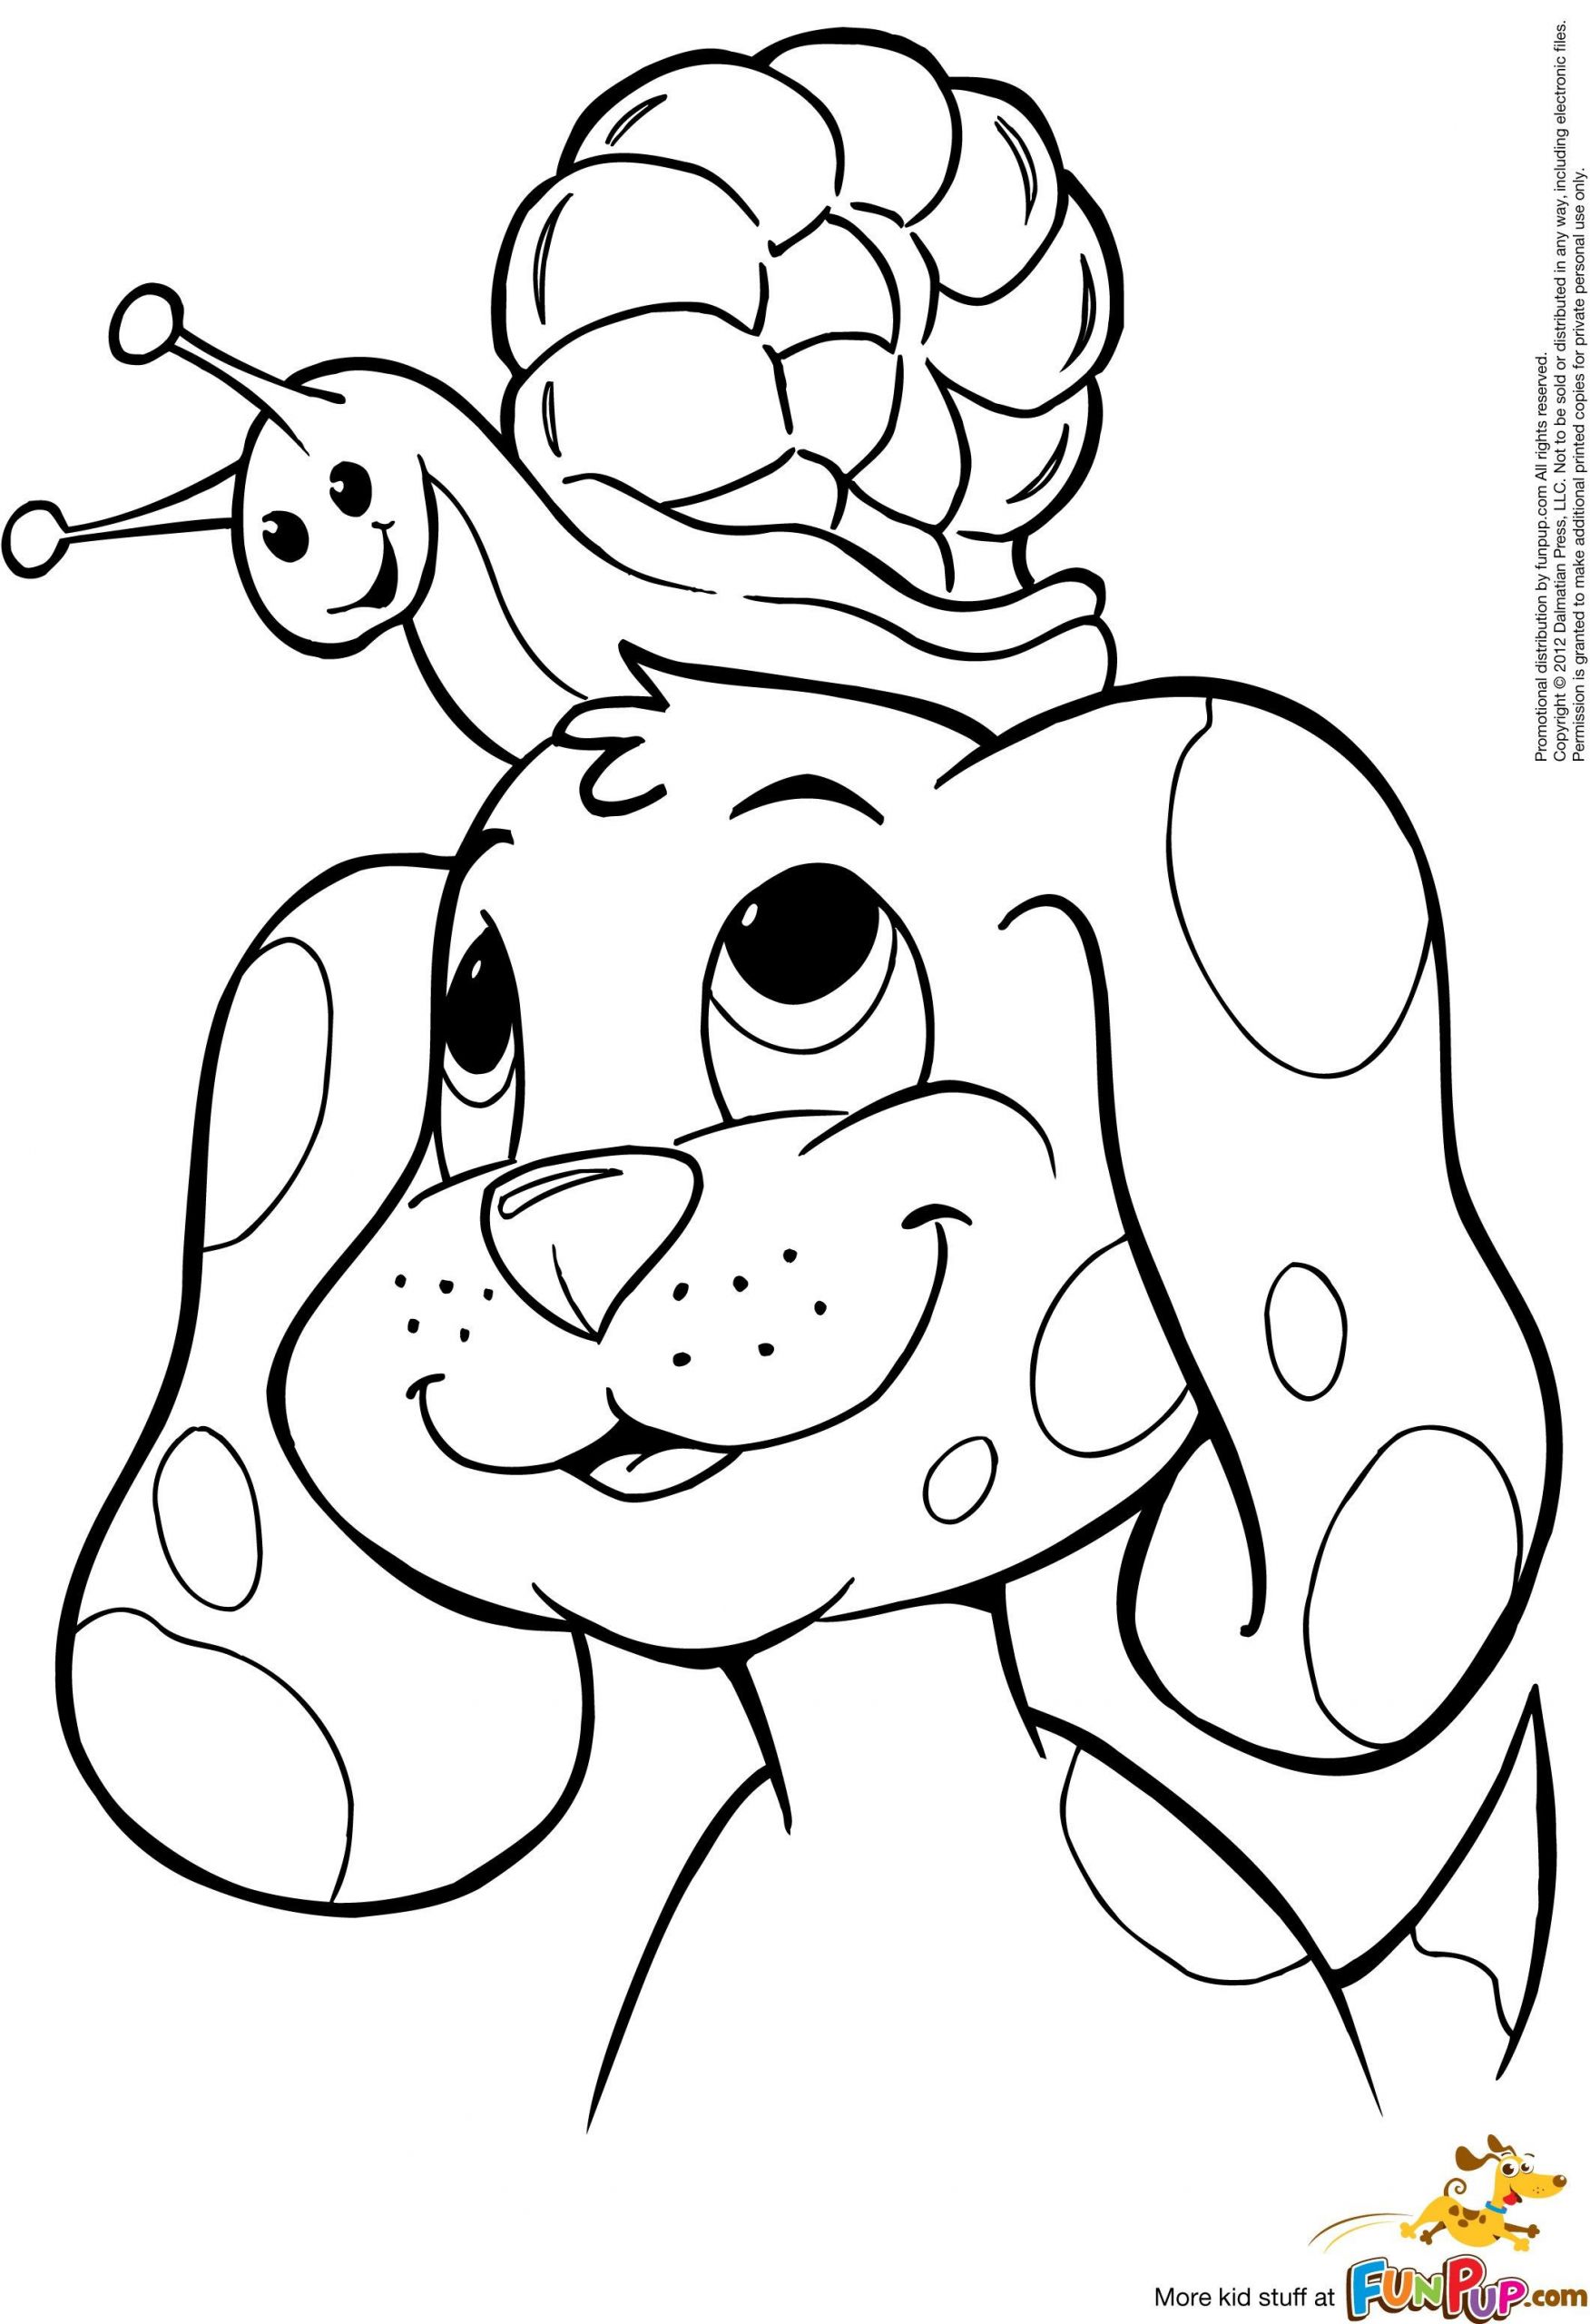 Puppy Coloring Pages For Kids
 Puppy 1 0 colouring pages Clip Art Miscellaneous